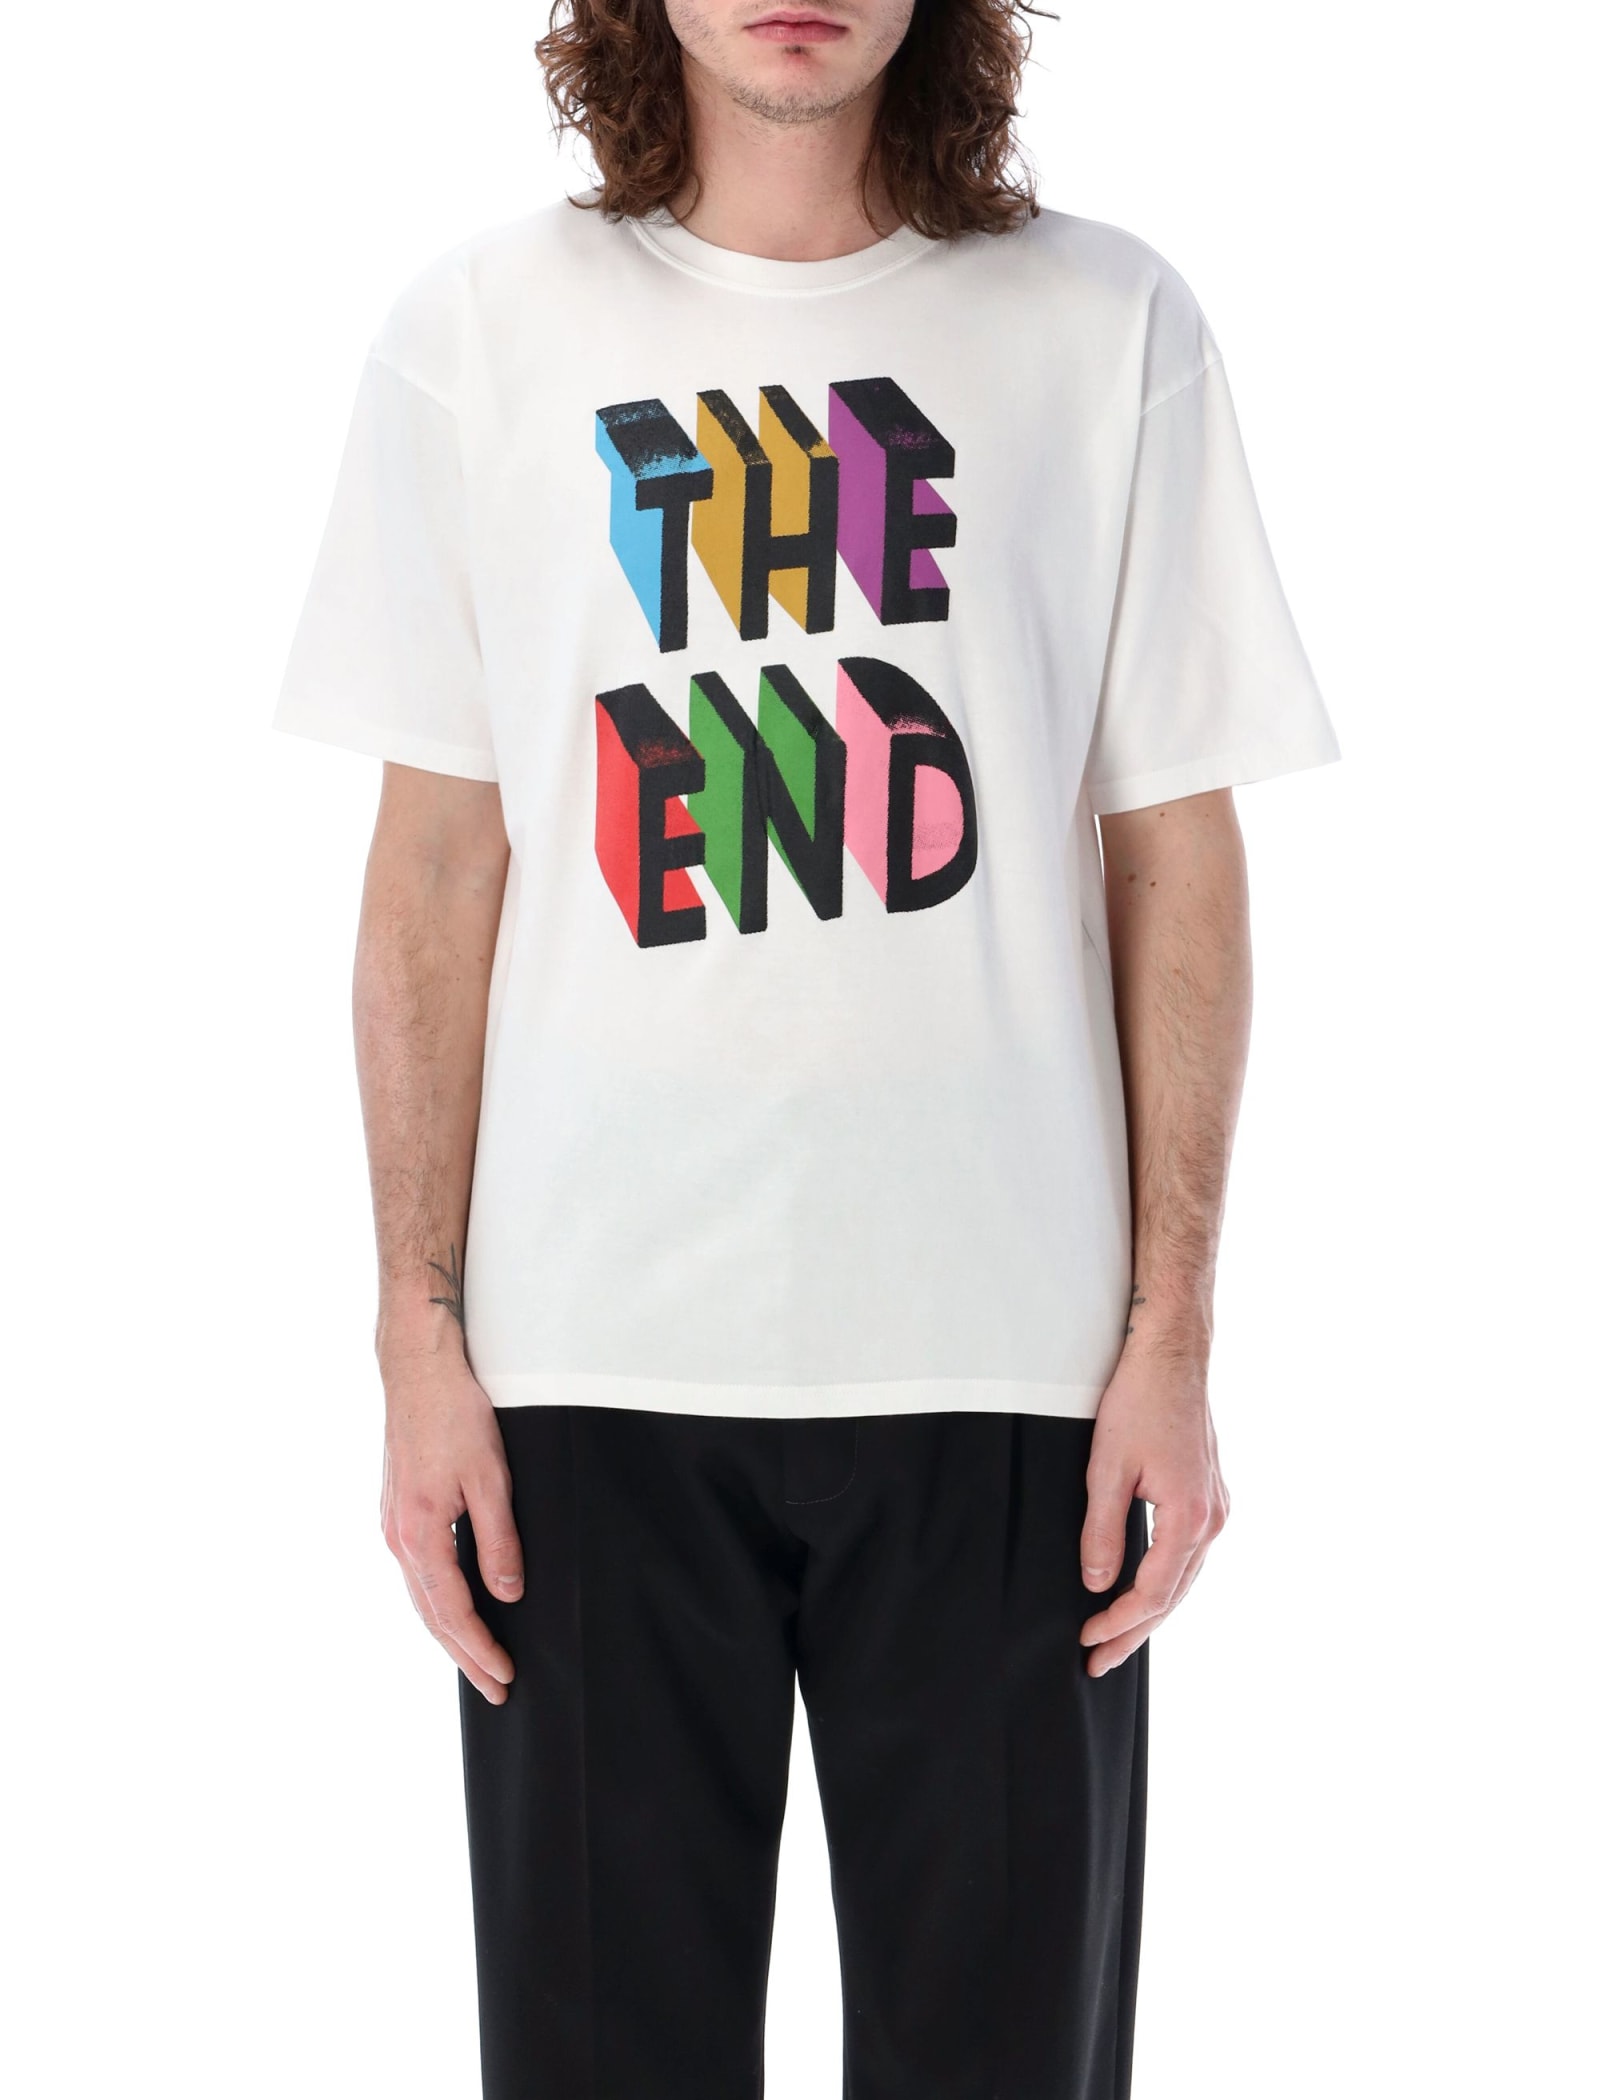 The End T-shirt